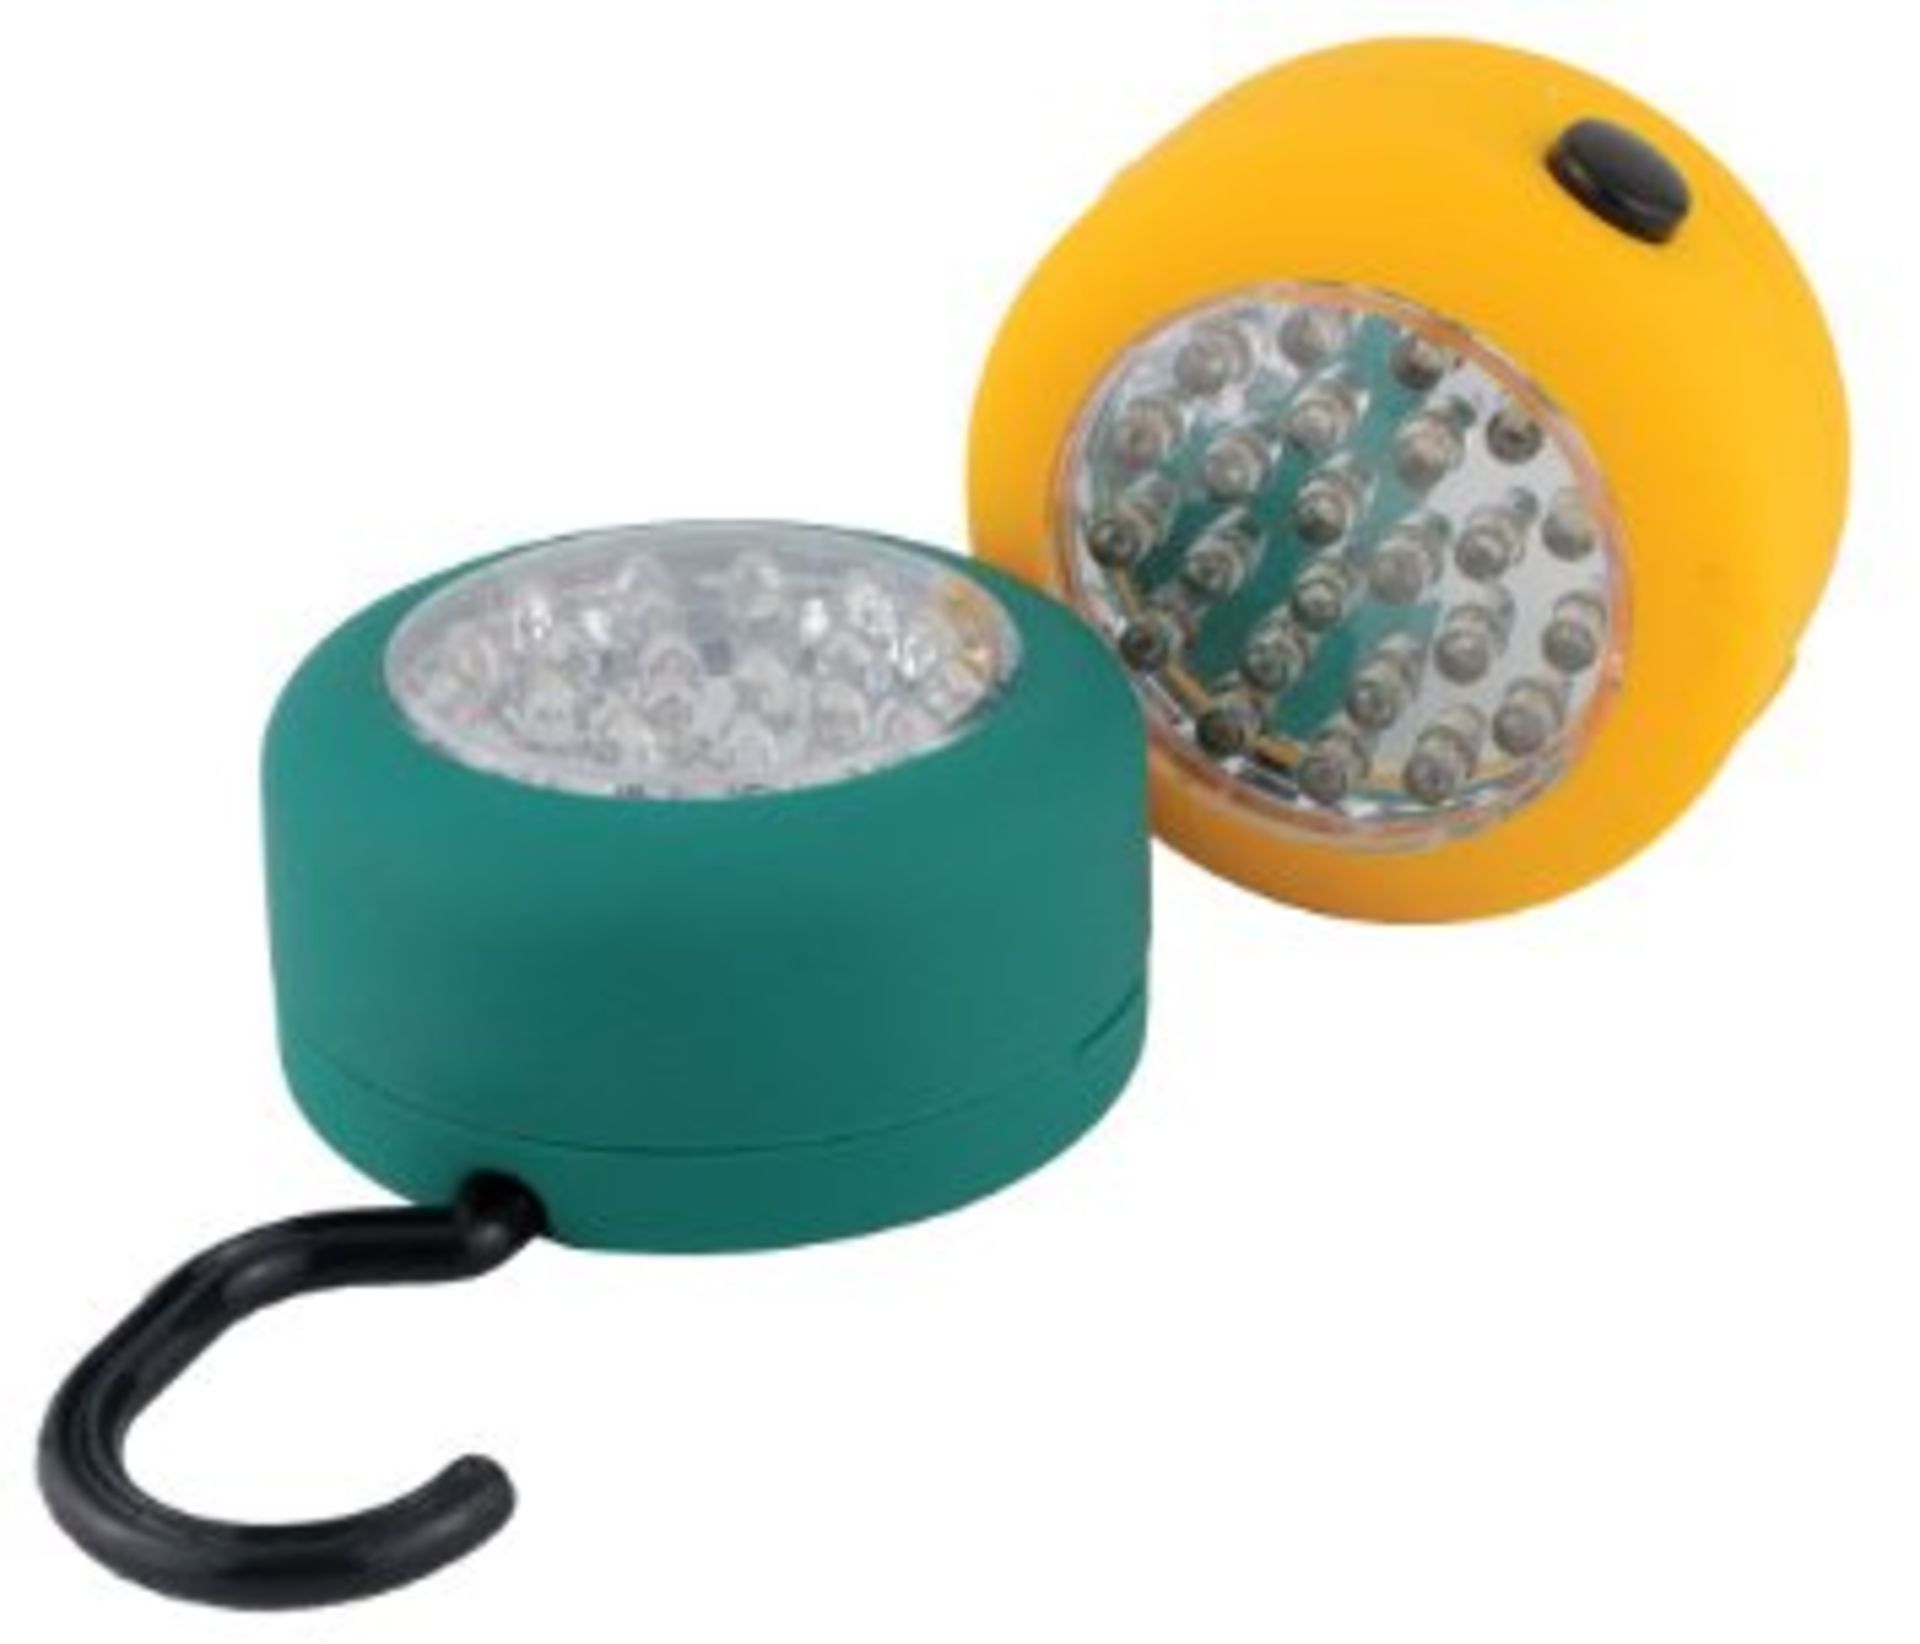 V *TRADE QTY* Grade A 24 LED Hanging Magnetic Light X 3 YOUR BID PRICE TO BE MULTIPLIED BY THREE